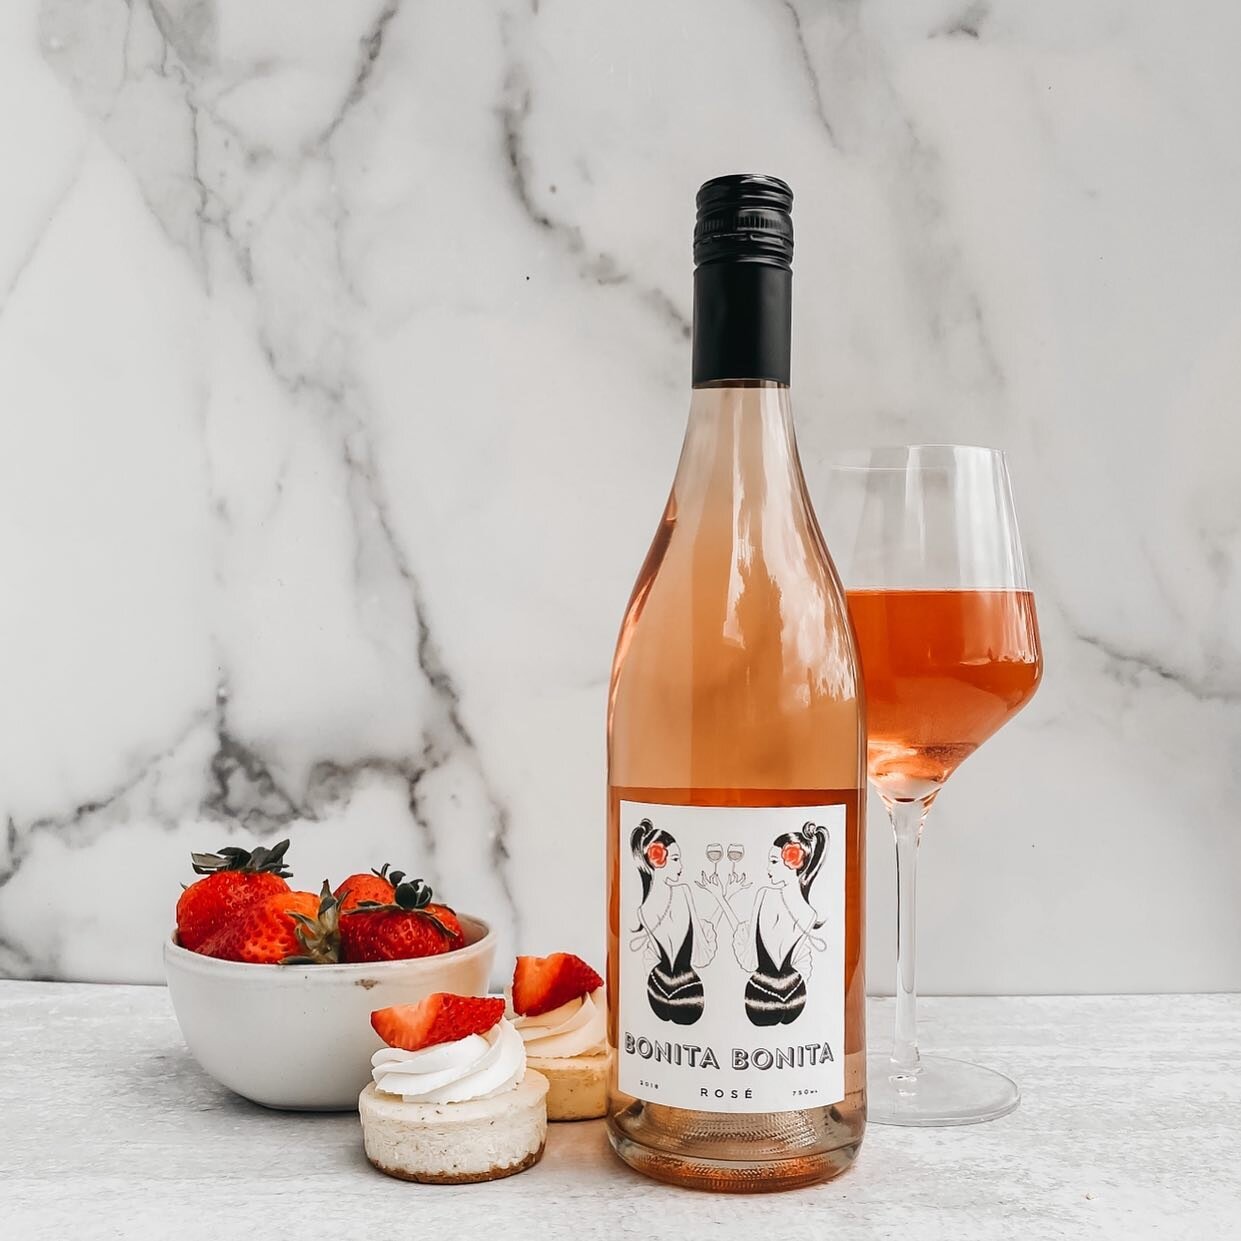 Somebody say dessert? 🥂🍓🍰 What&rsquo;s your favorite dessert pairing with ros&eacute;?! ⬇️

#bonita #bonitabonita #dessert #ros&eacute; #napa #napavalley #naparos&eacute; #strawberry #vino 

📸 @amaes_photography